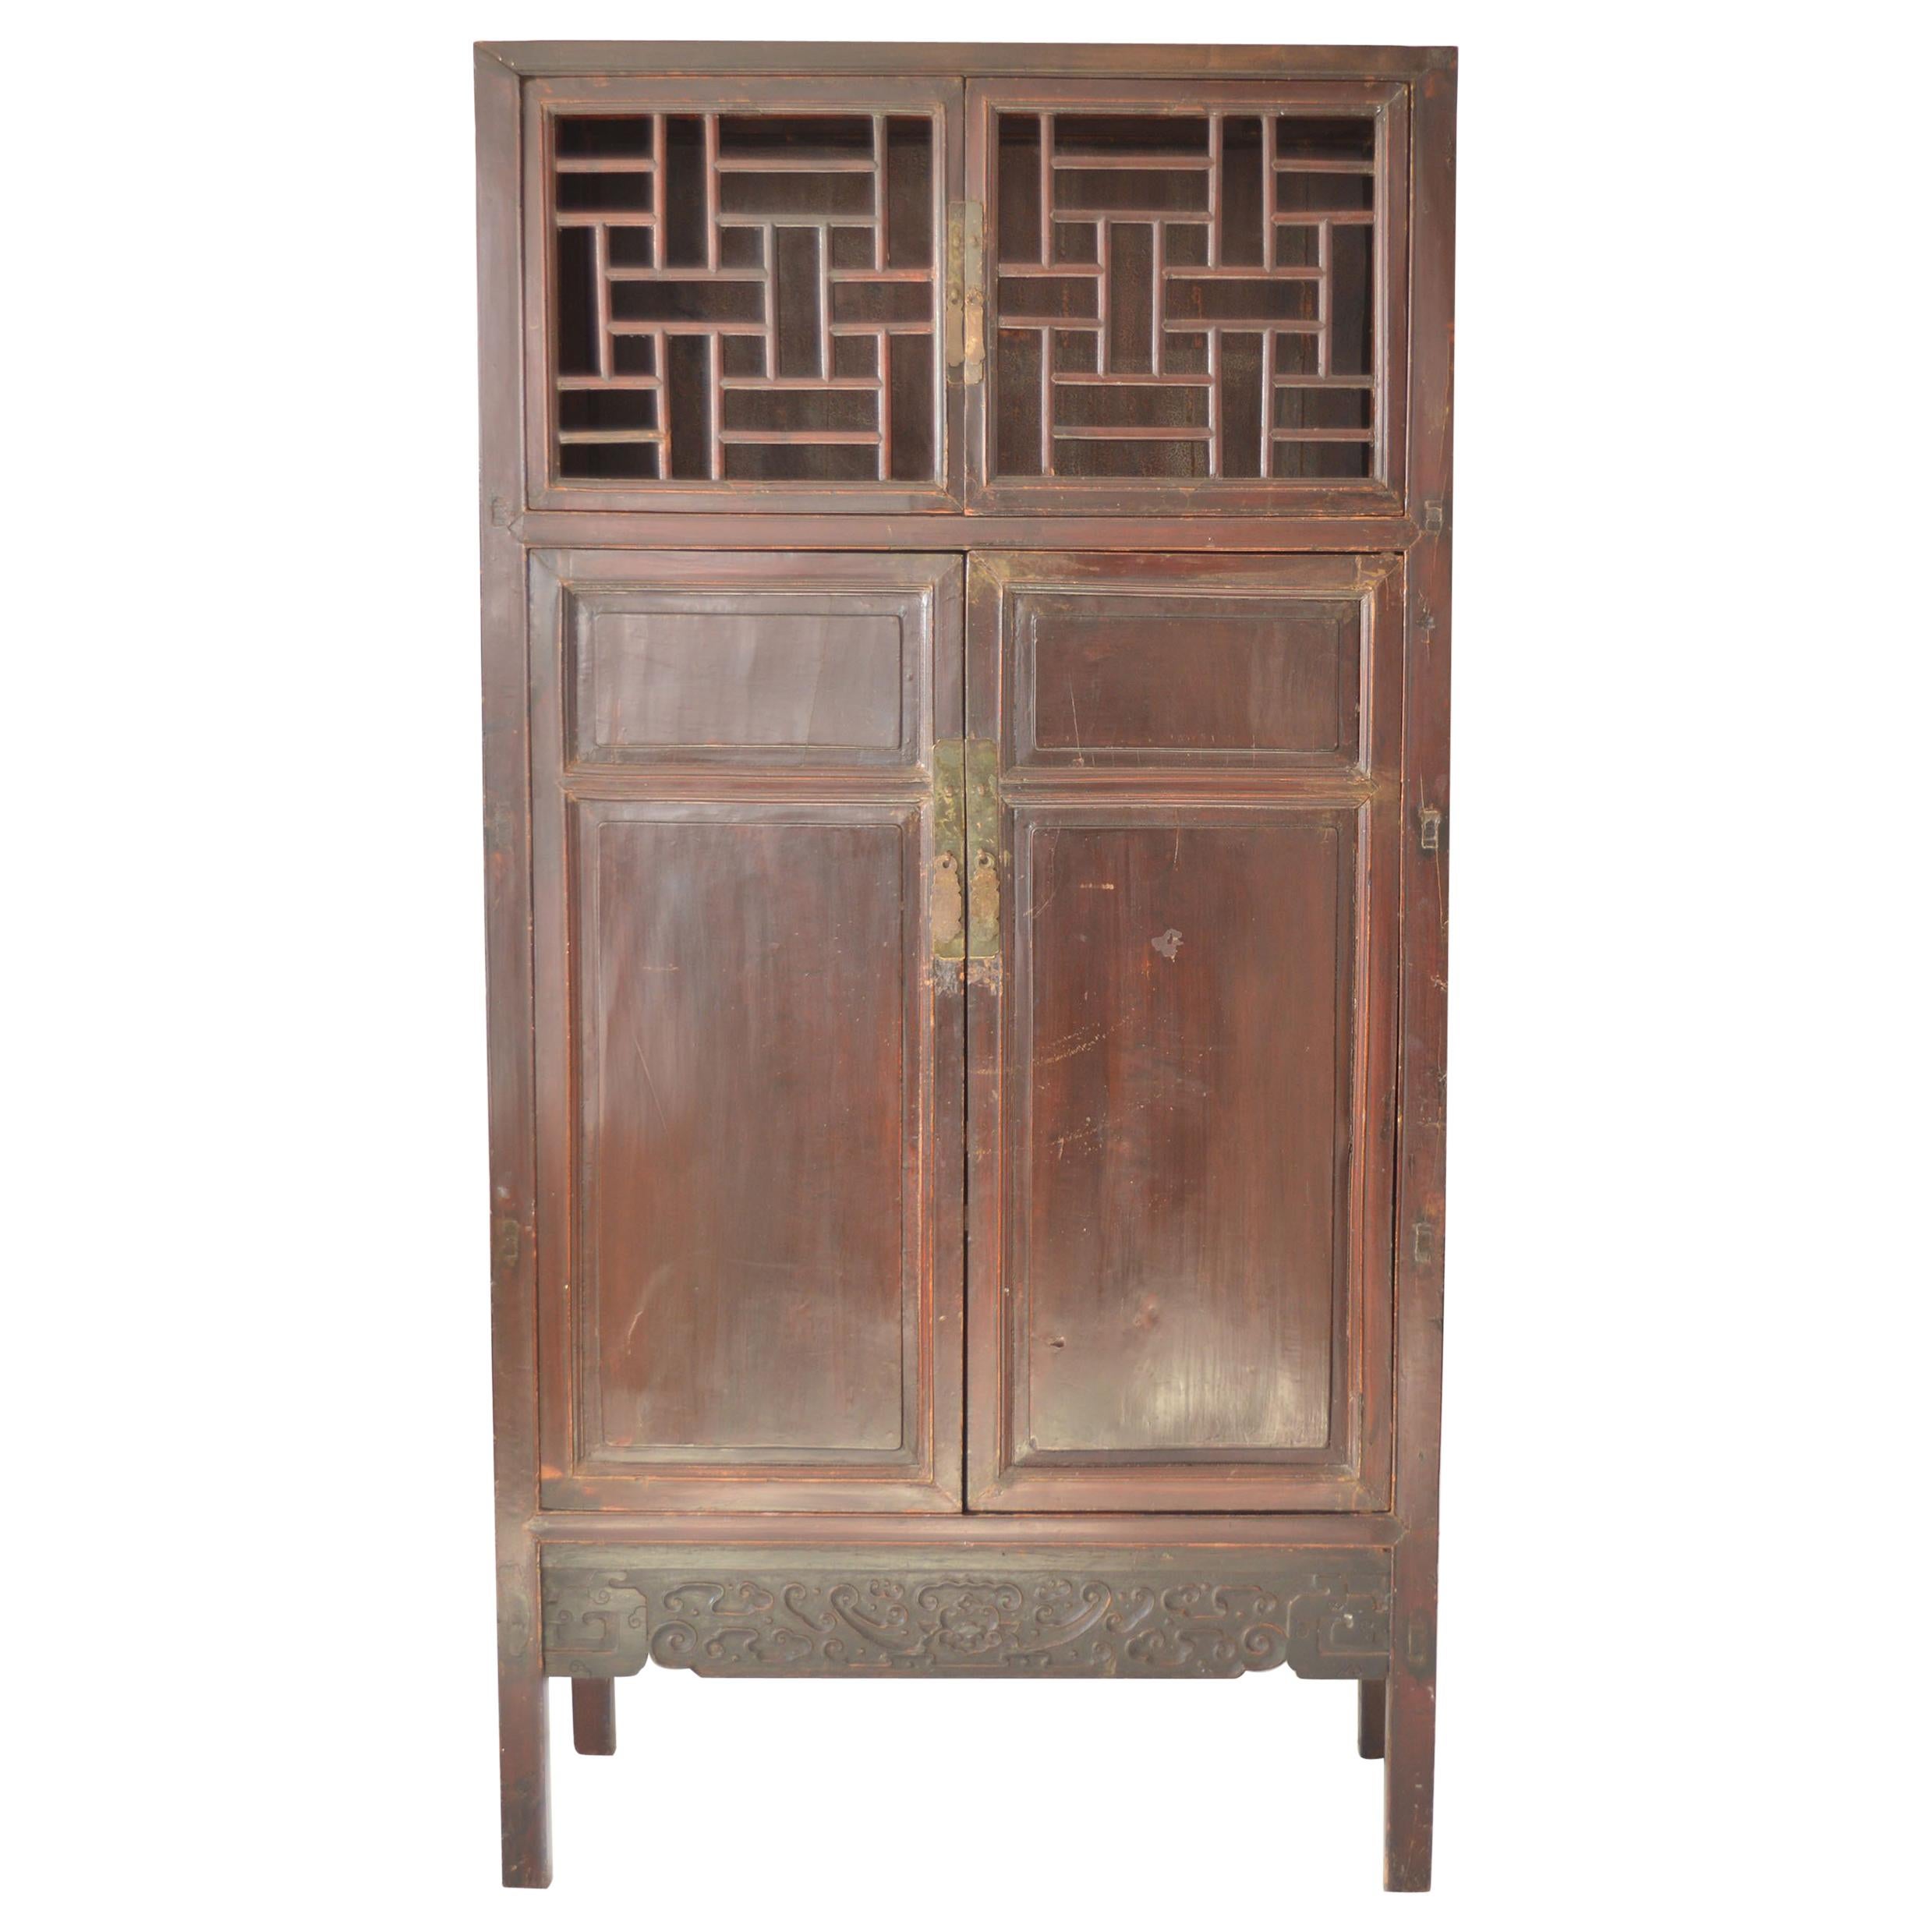 Antique Chinese Lacquered Cabinet with Lattice Work Doors, 19th Century